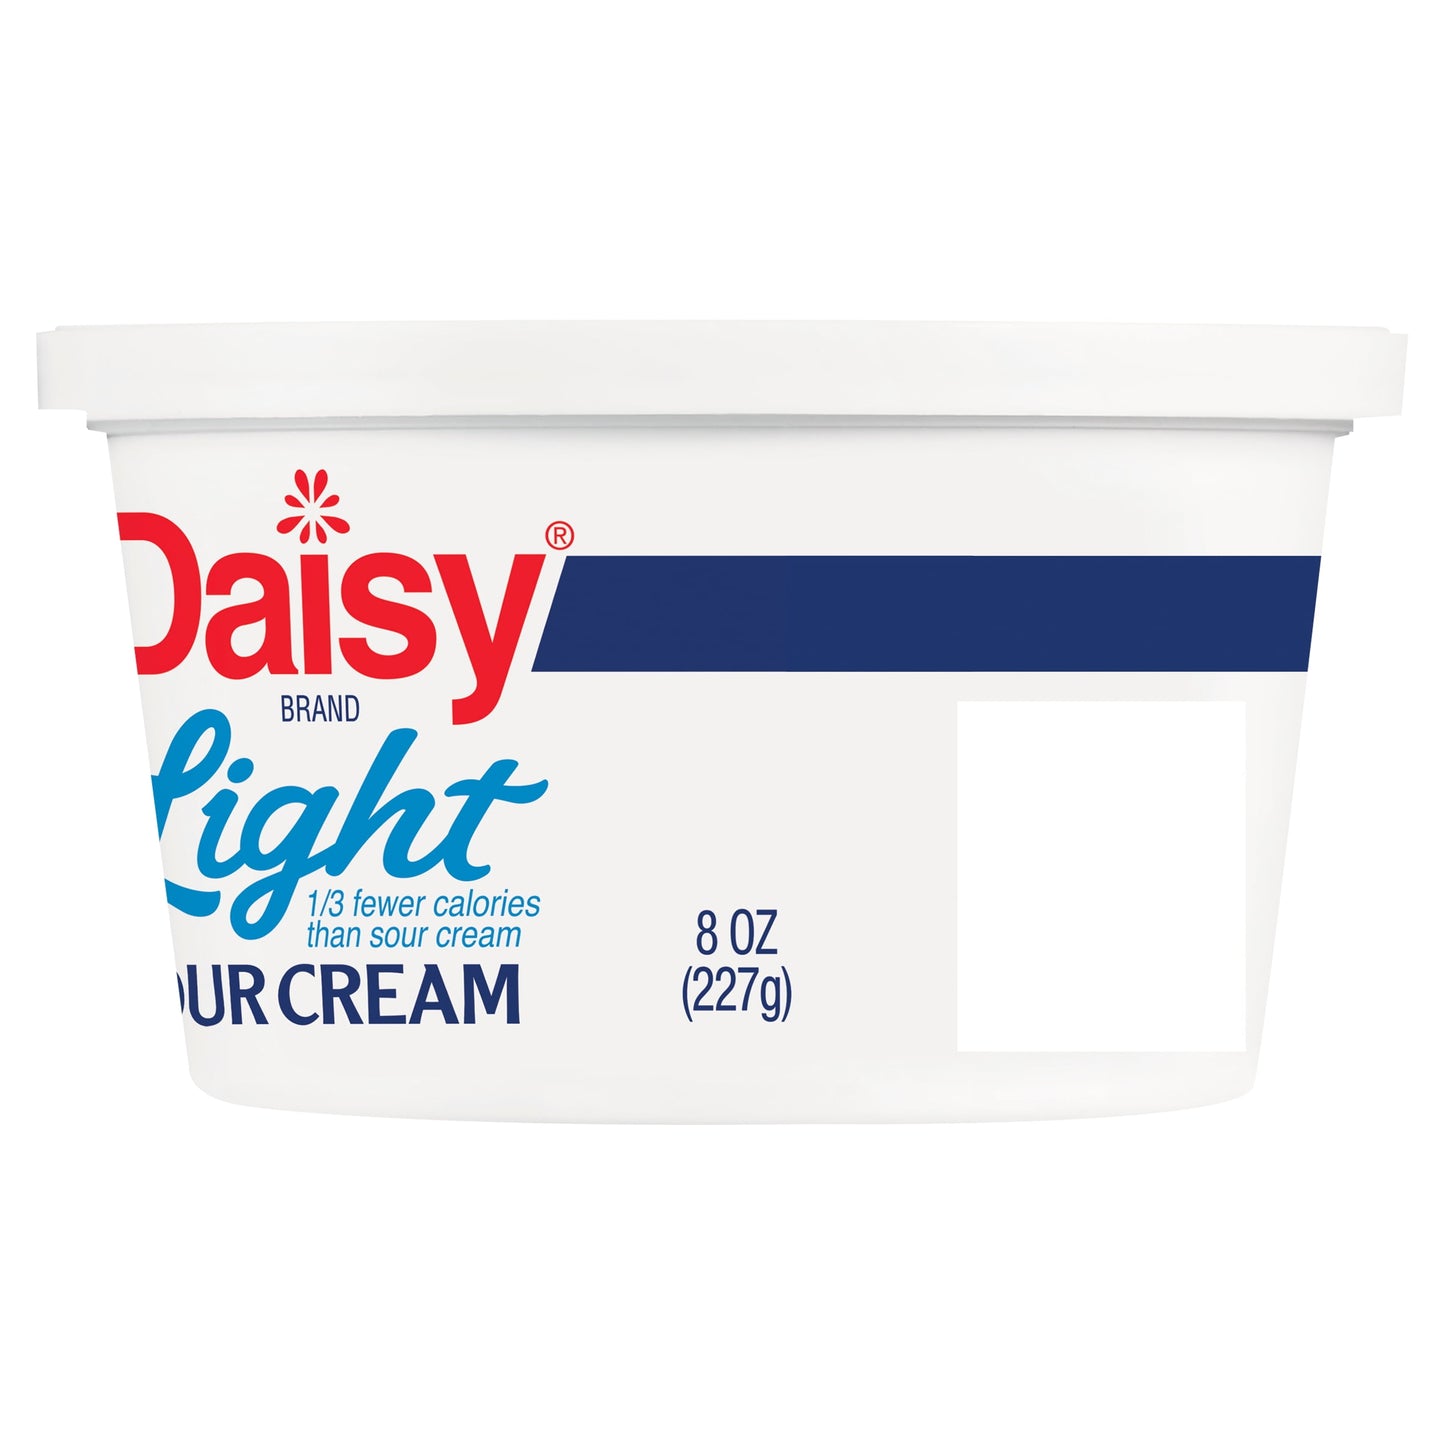 Daisy Pure and Natural Light Sour Cream, 50% Less Fat, 8 oz Tub (Refrigerated)